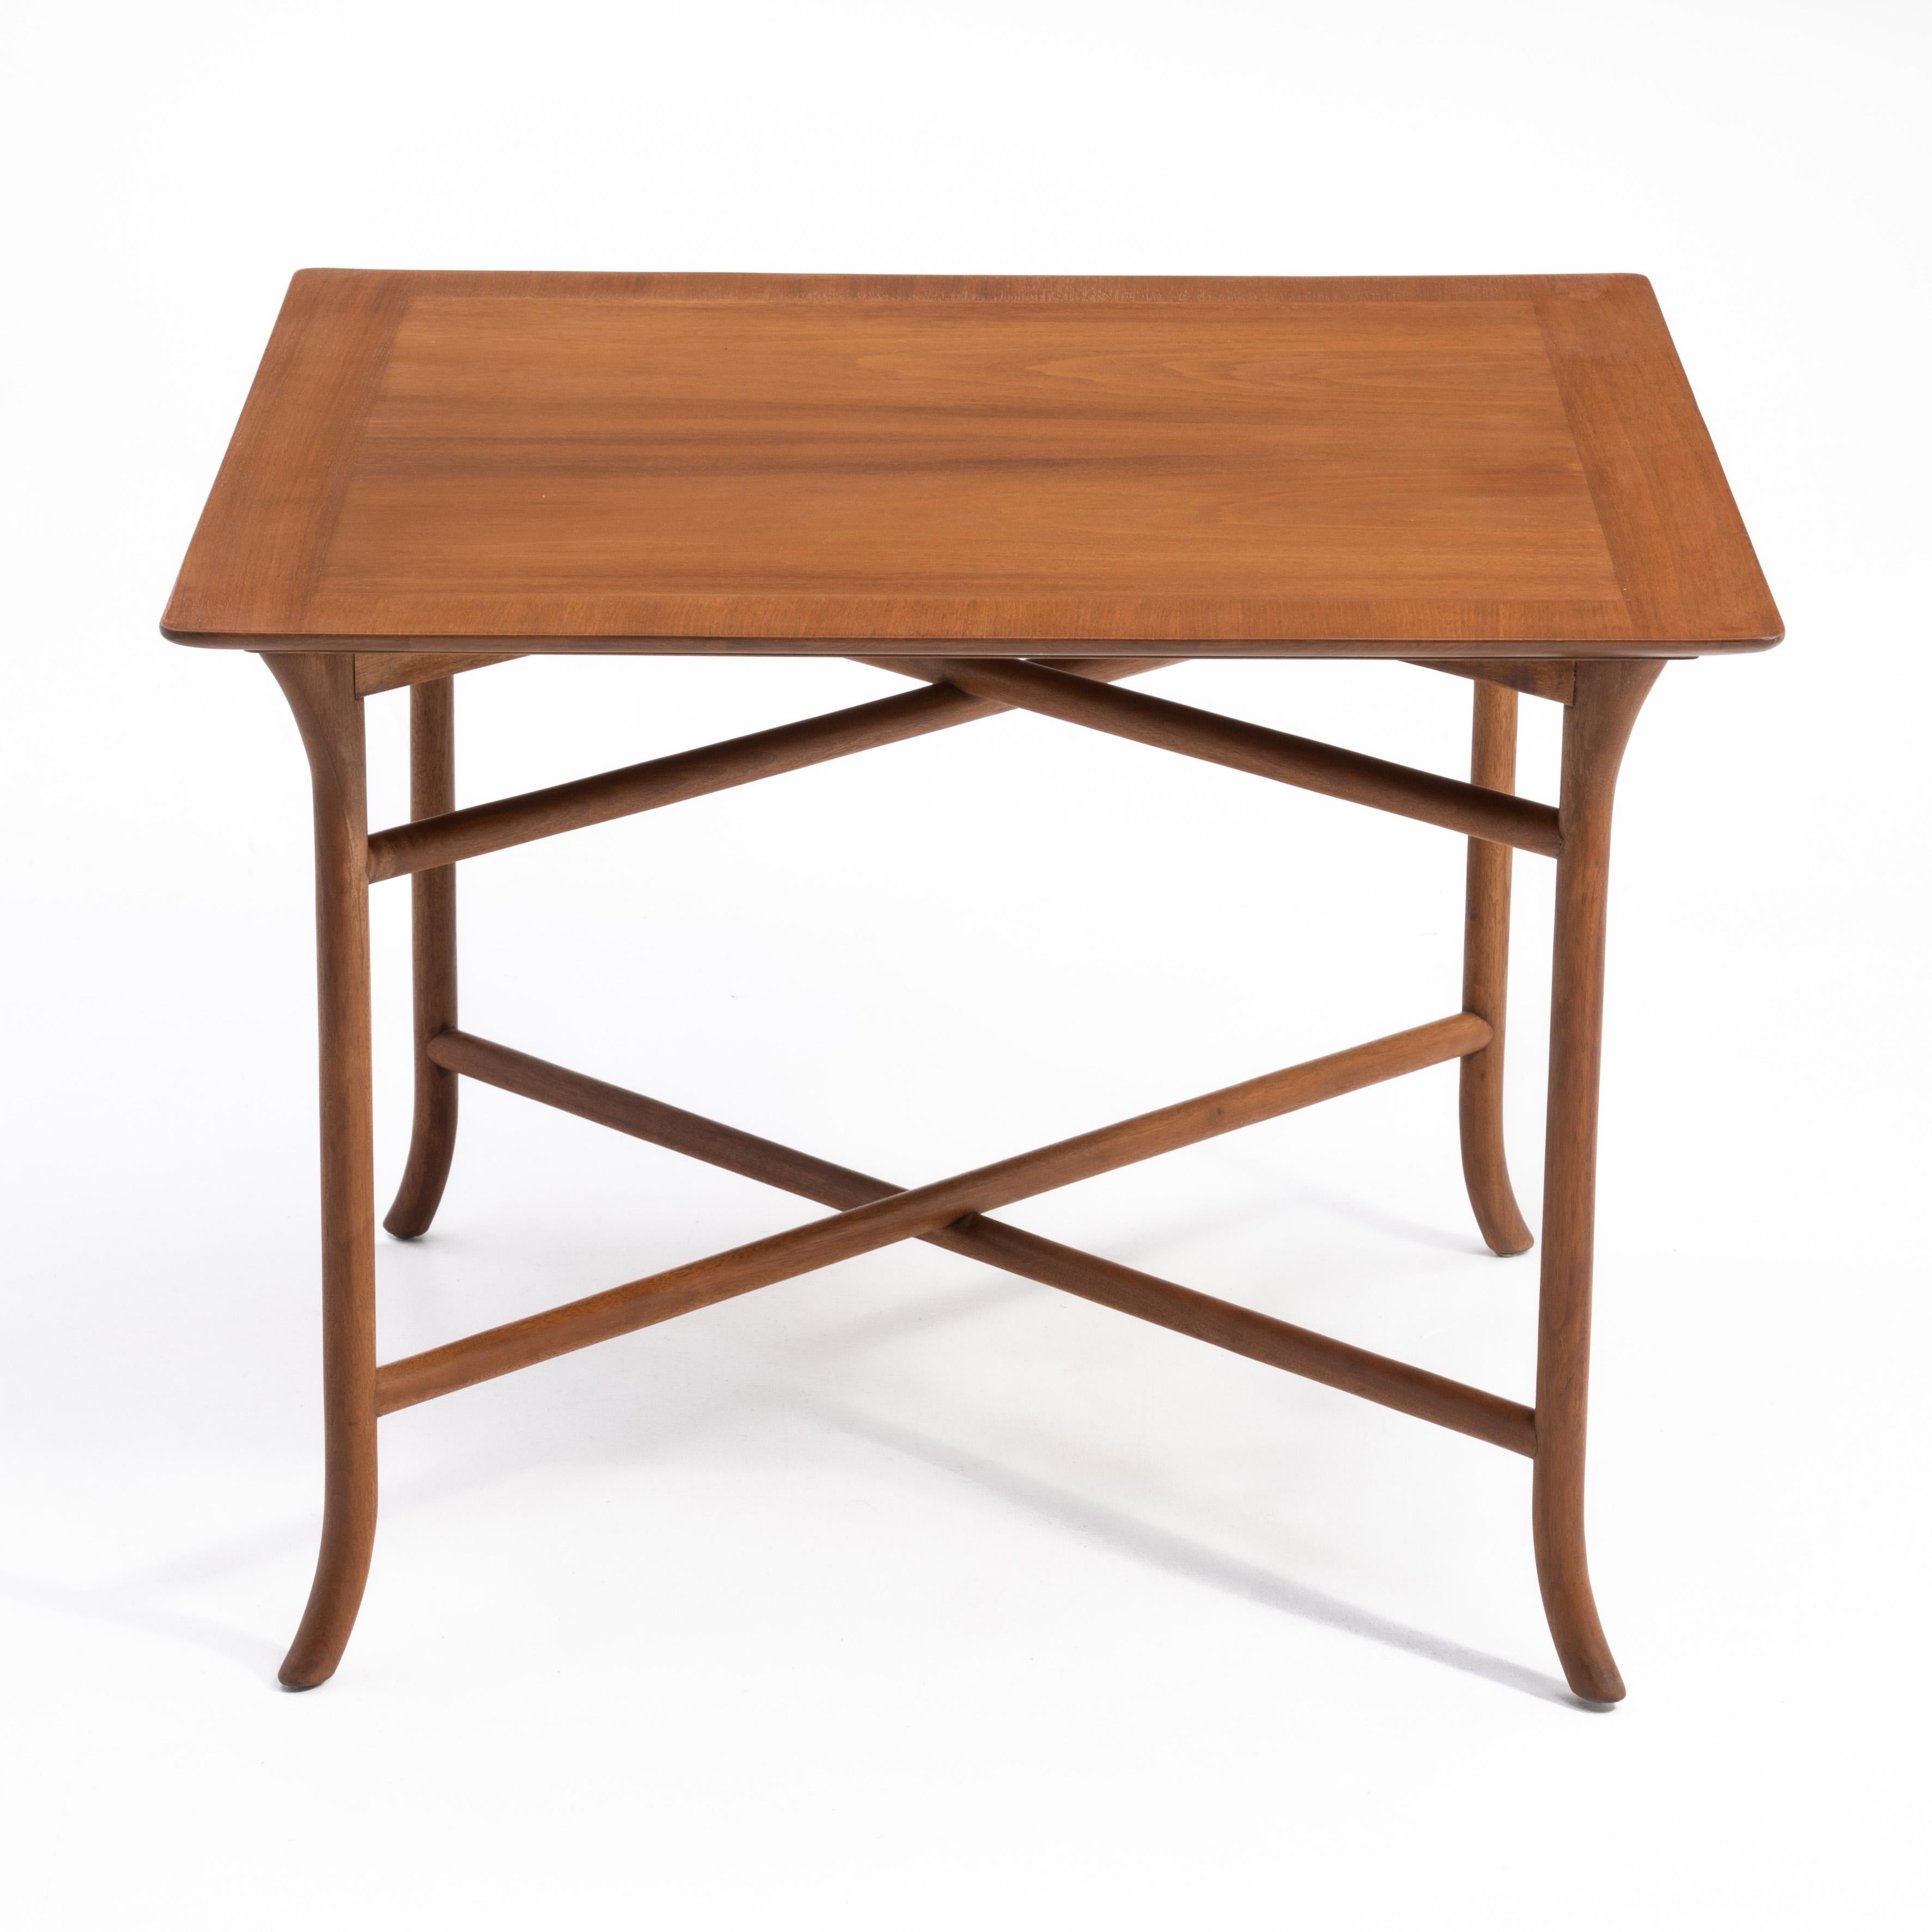 A refined T.H. Robsjohn-Gibbings for Widdicomb table that will serve nicely as a coffee, end or side table. The table is made of bleached mahogany and features carved and curved saber legs and a beveled top with expertly book matched veneer. It has